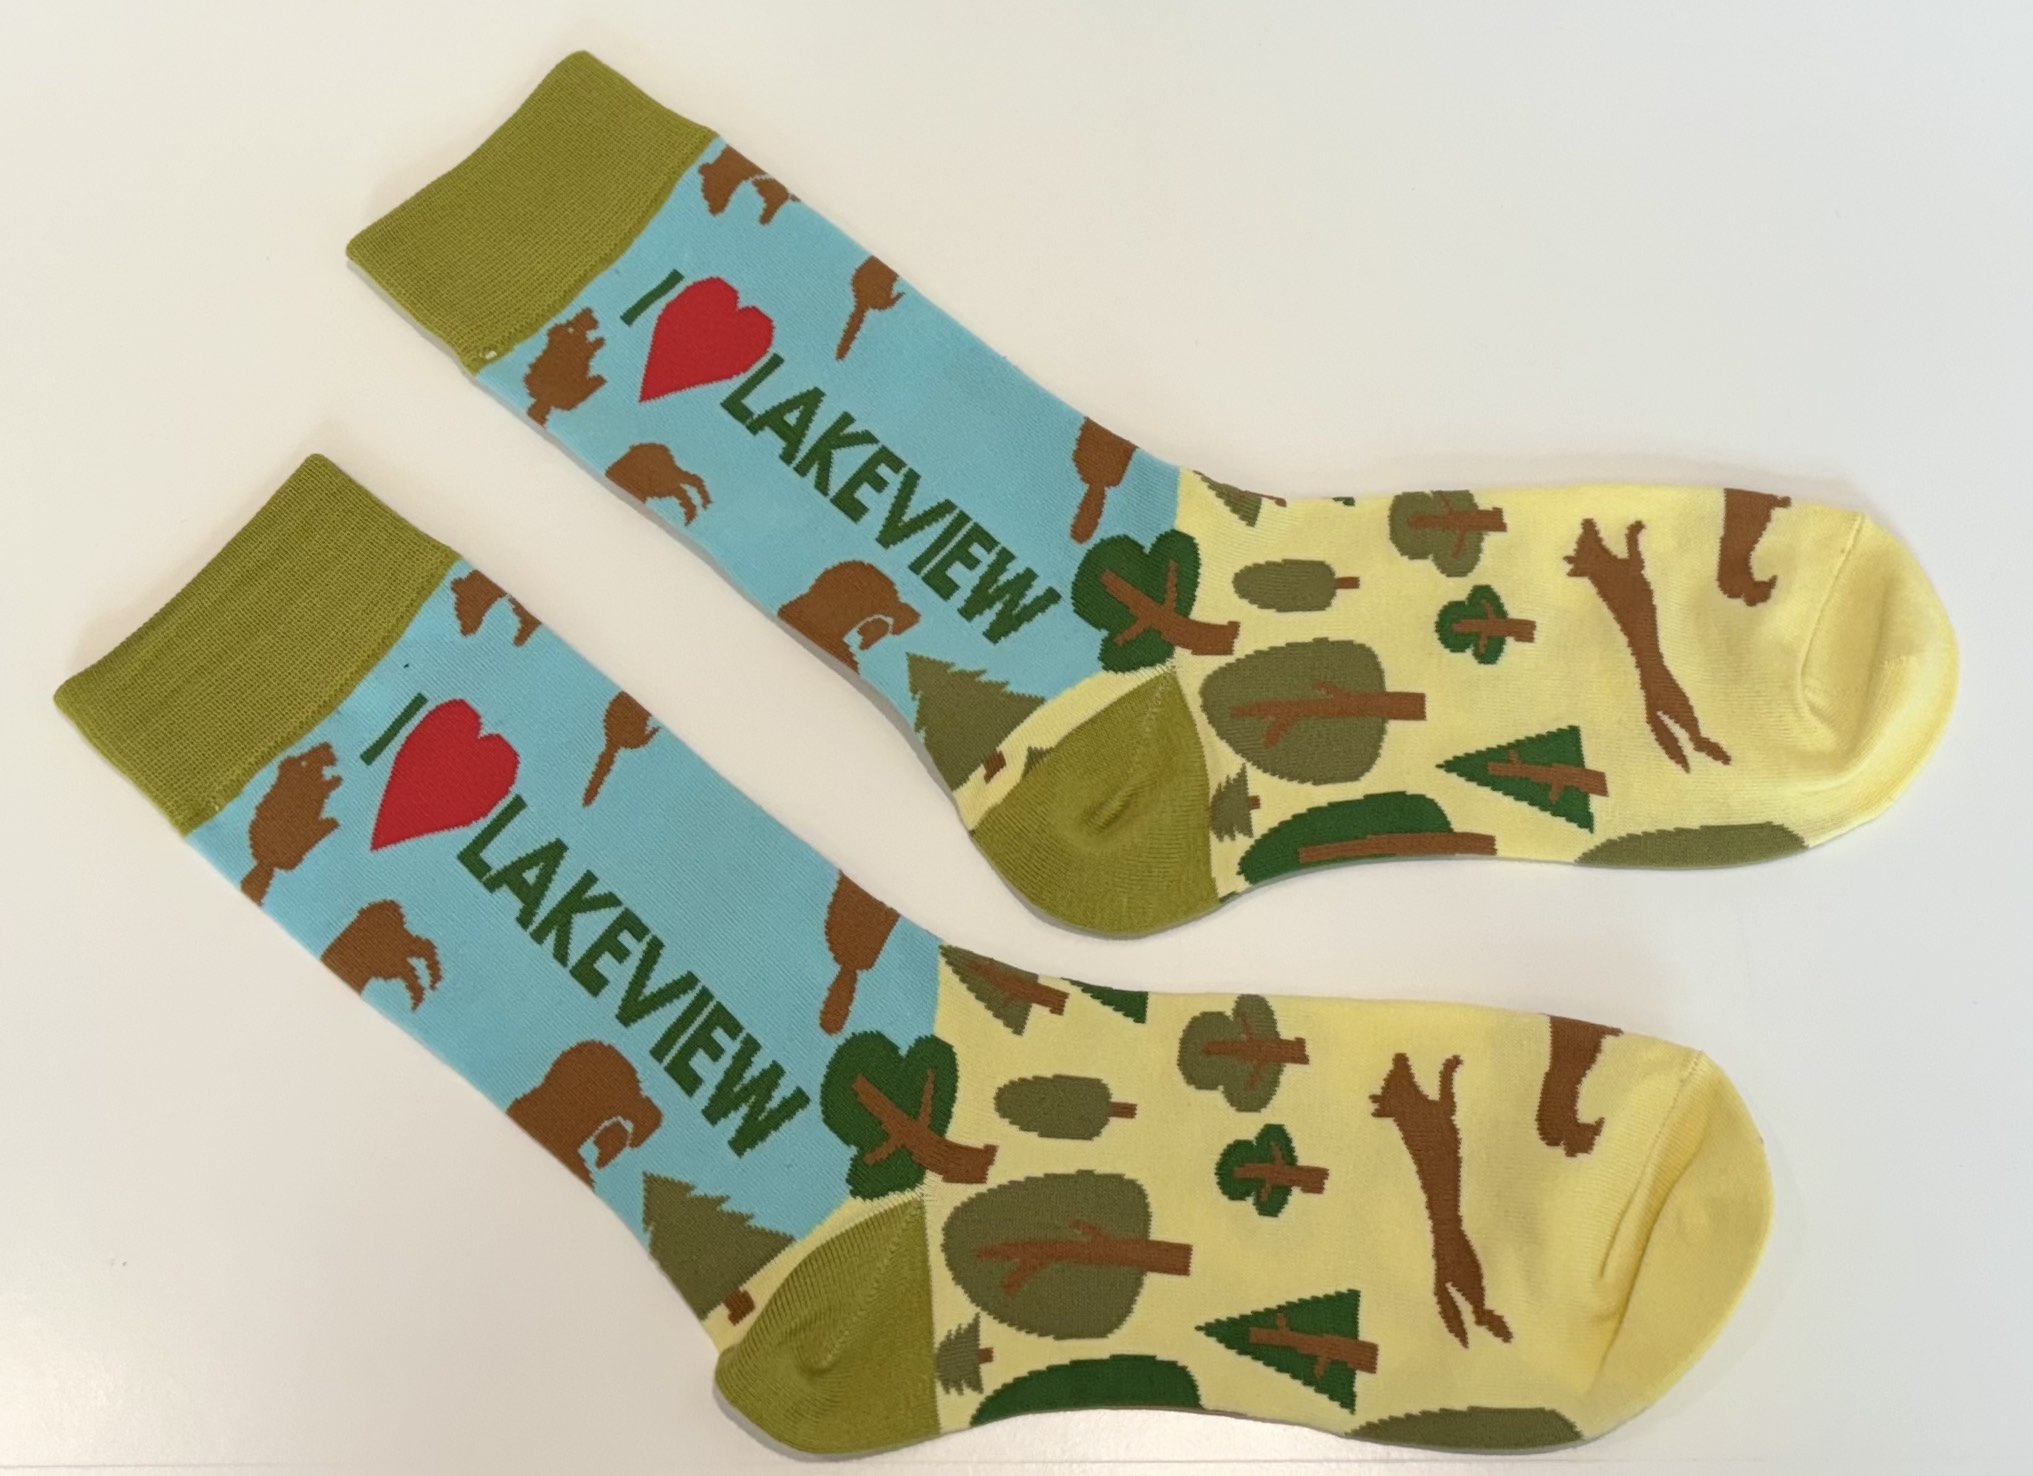 Get yours now – “I ❤️ Lakeview” socks